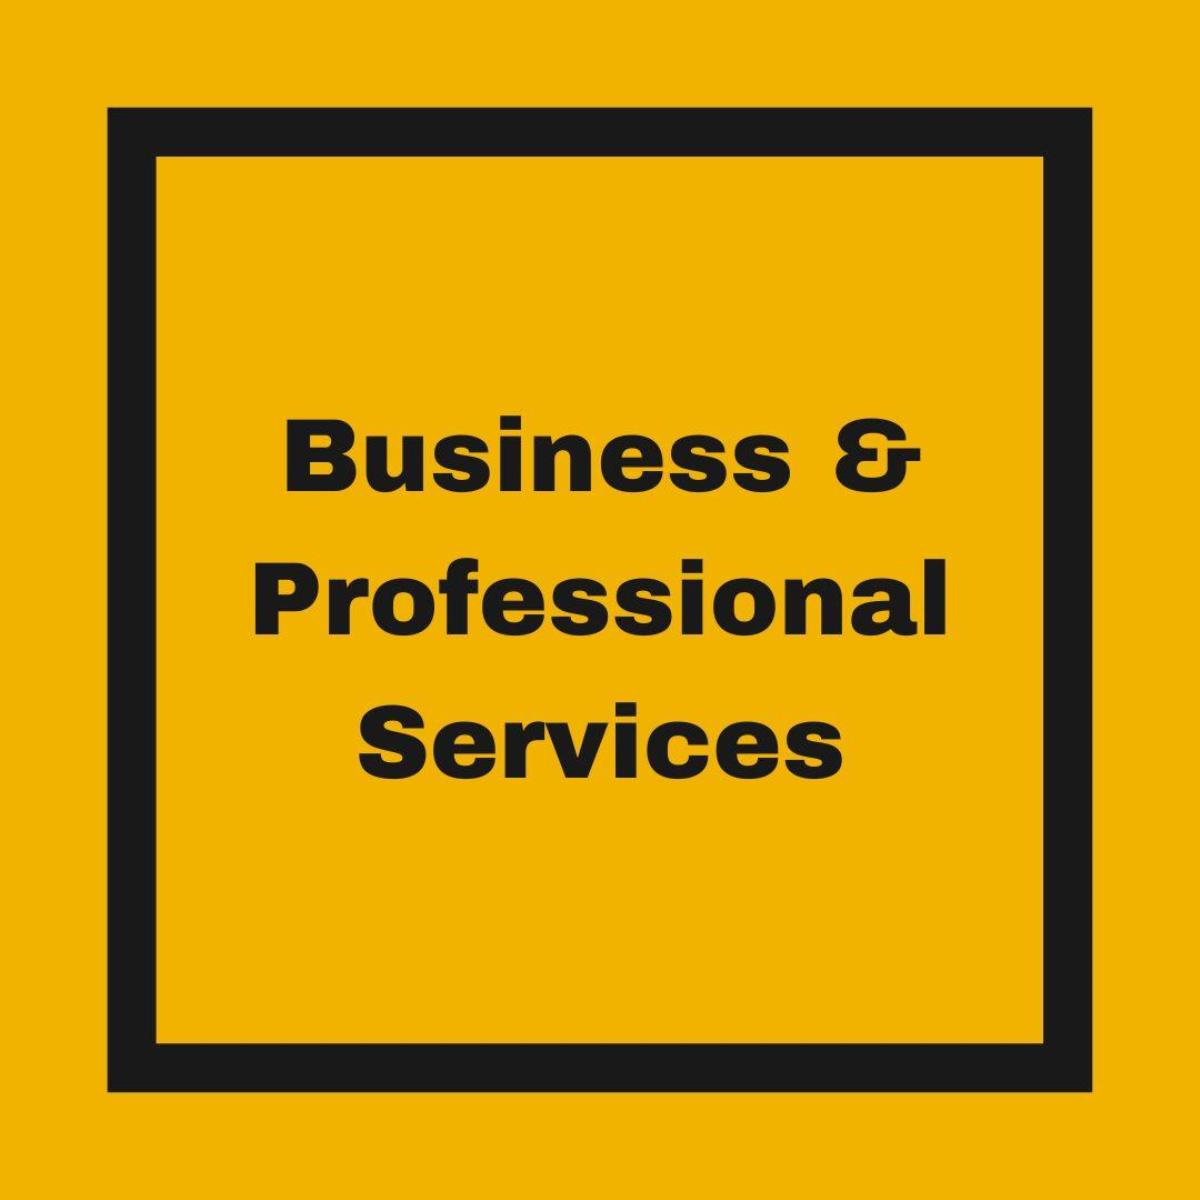 Business Directory - Business and Professional Services